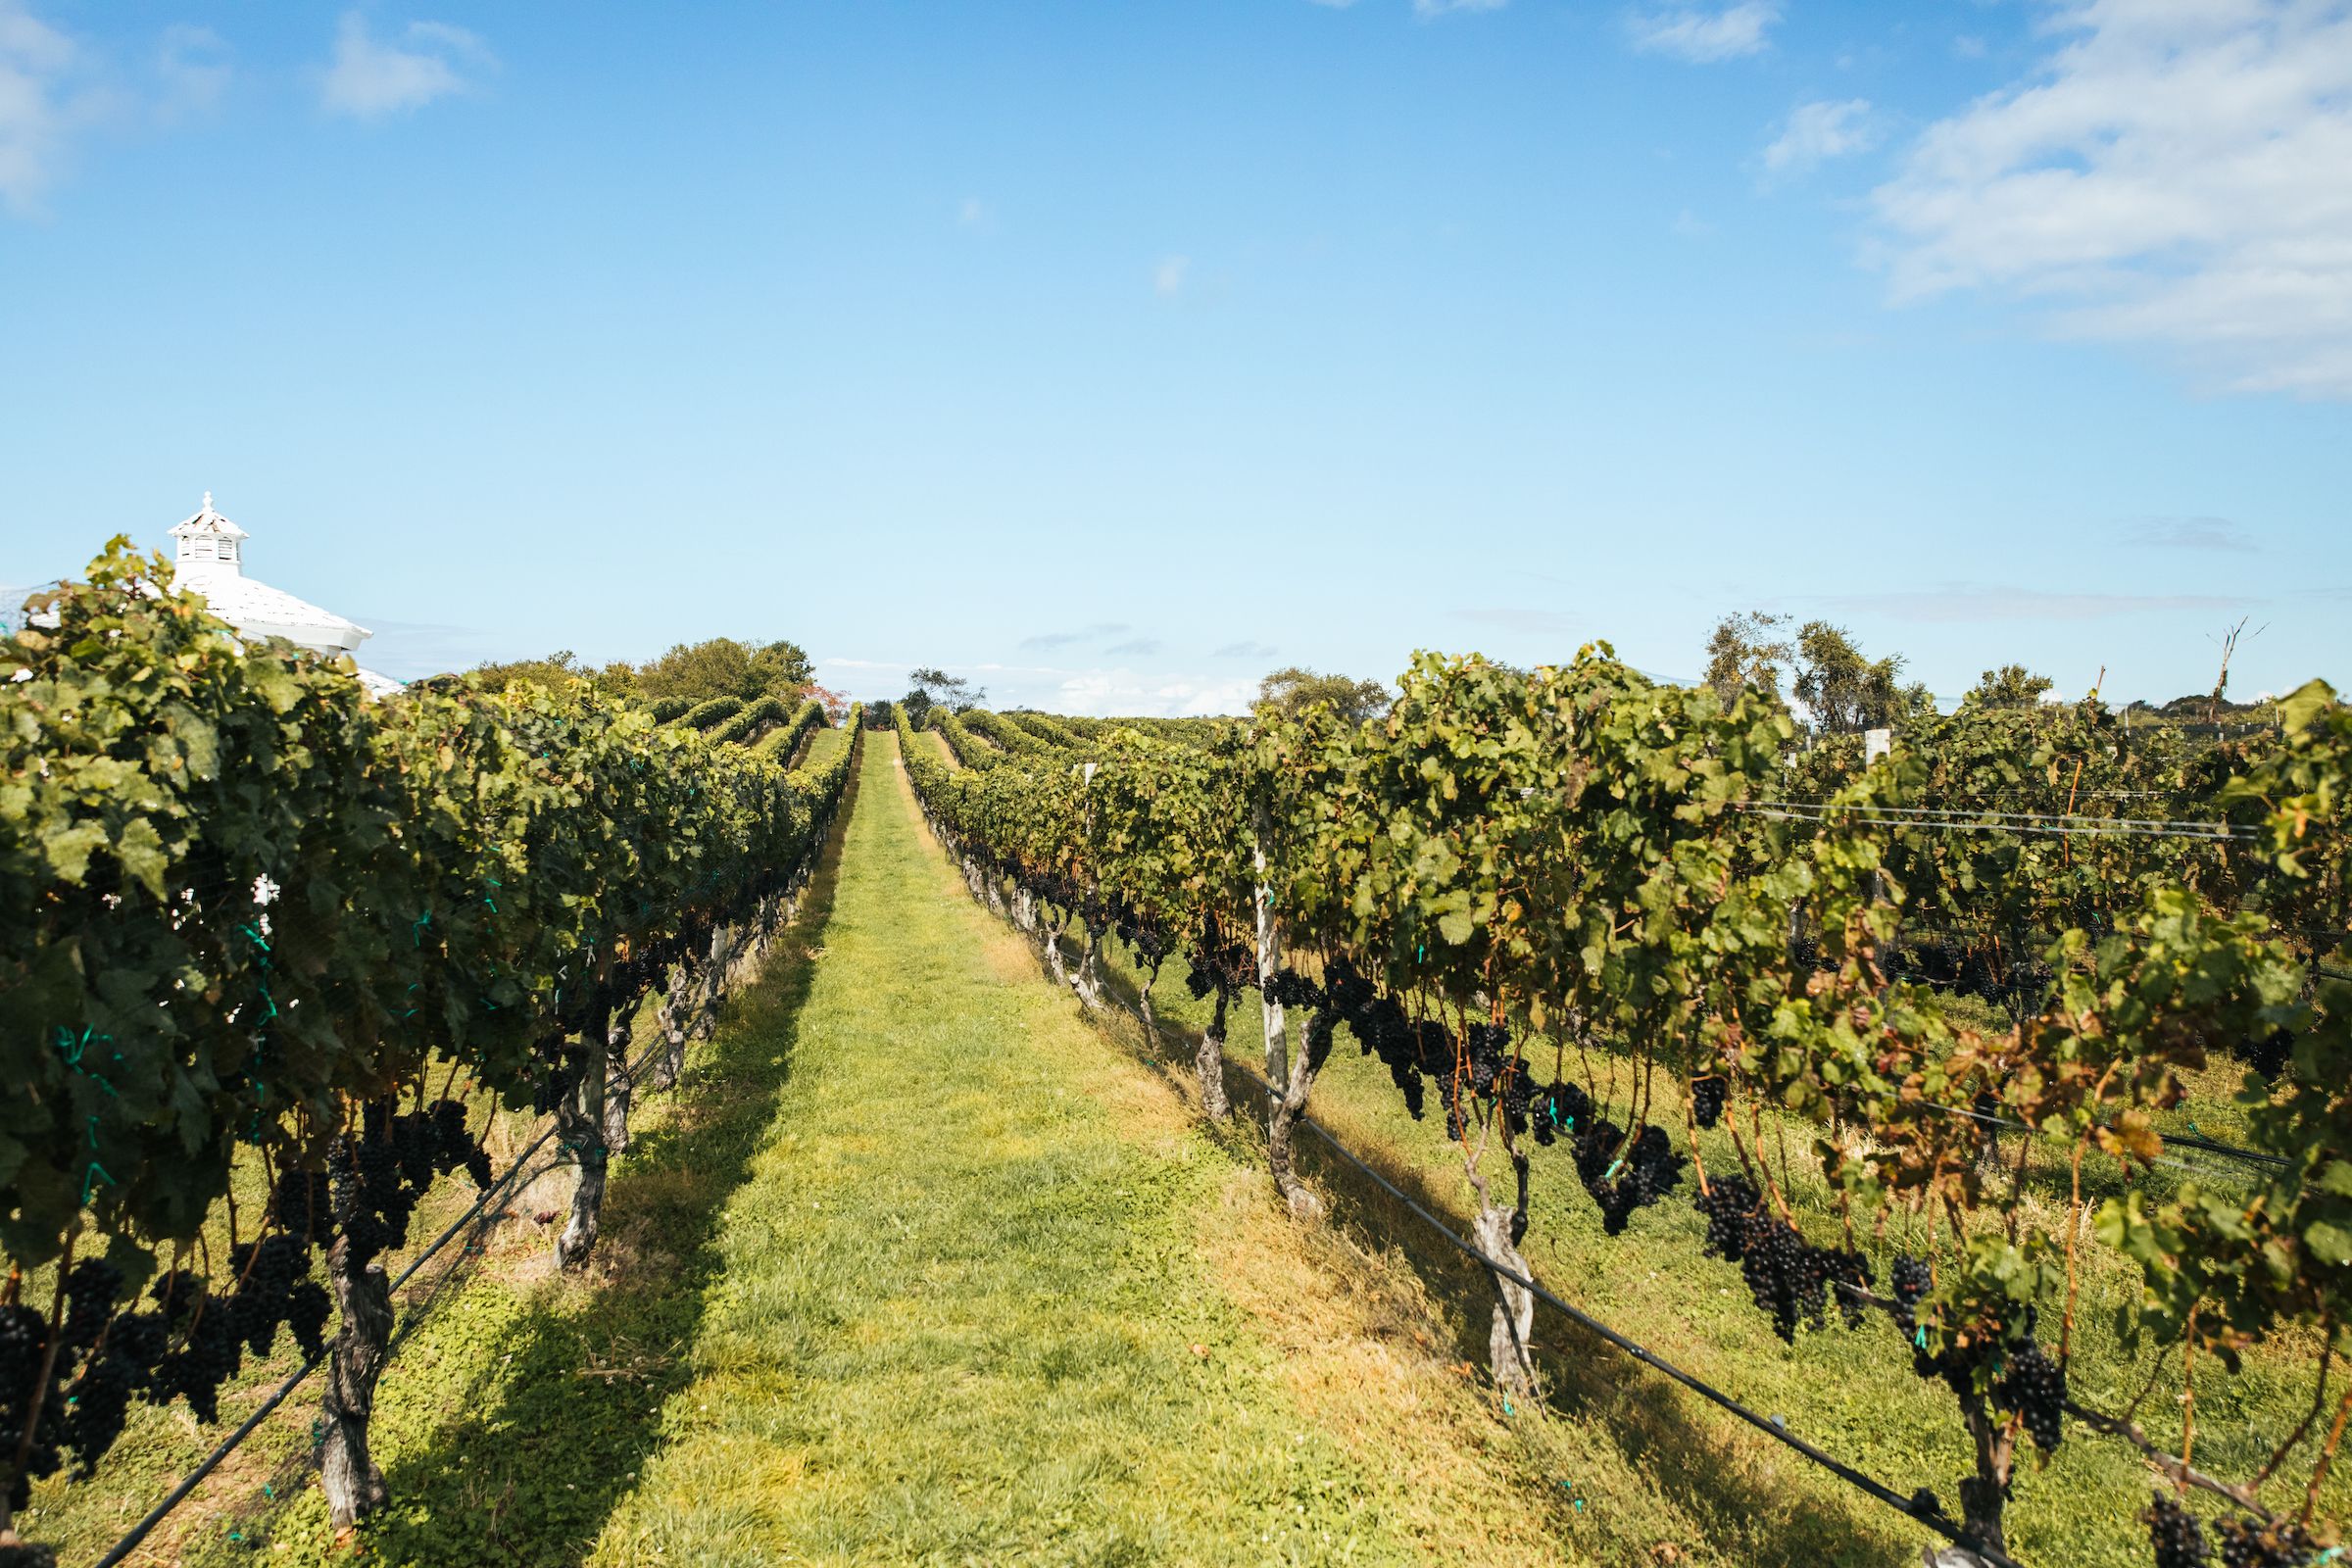 8 Best Wine Vacations - Best Summer Trips for Wine Lovers